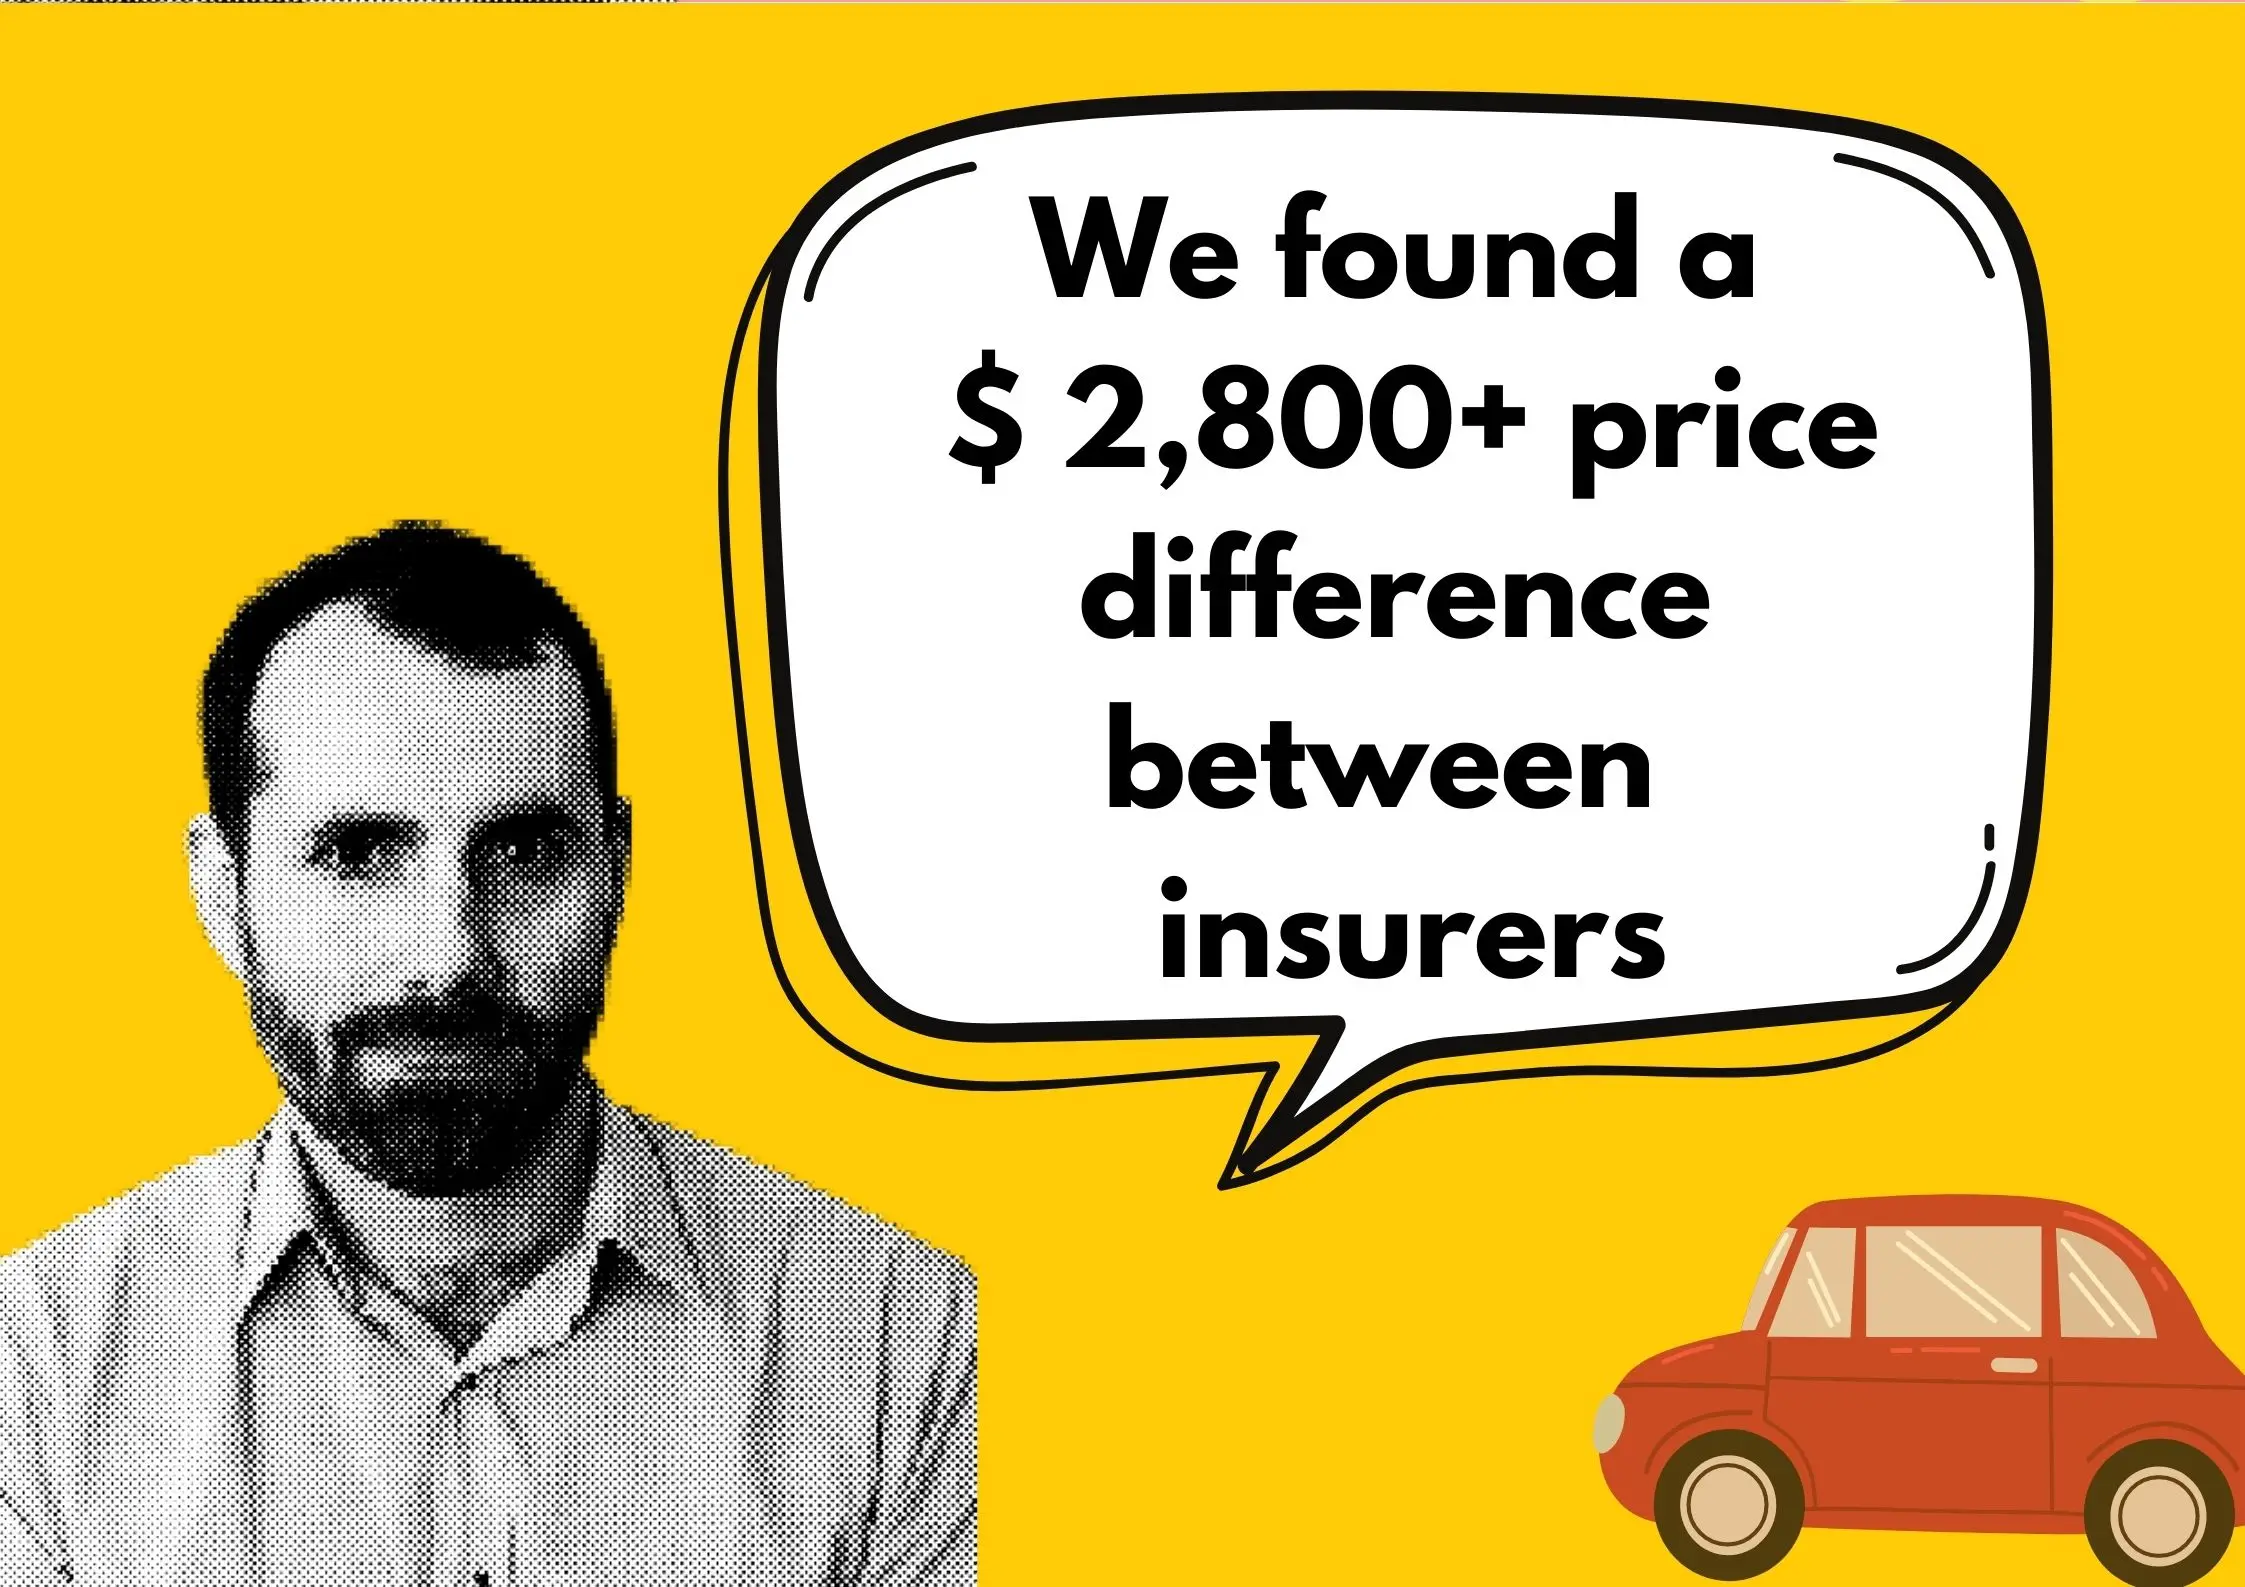 We found a $2800+ price diference between insurers, James Martin, insurance expert